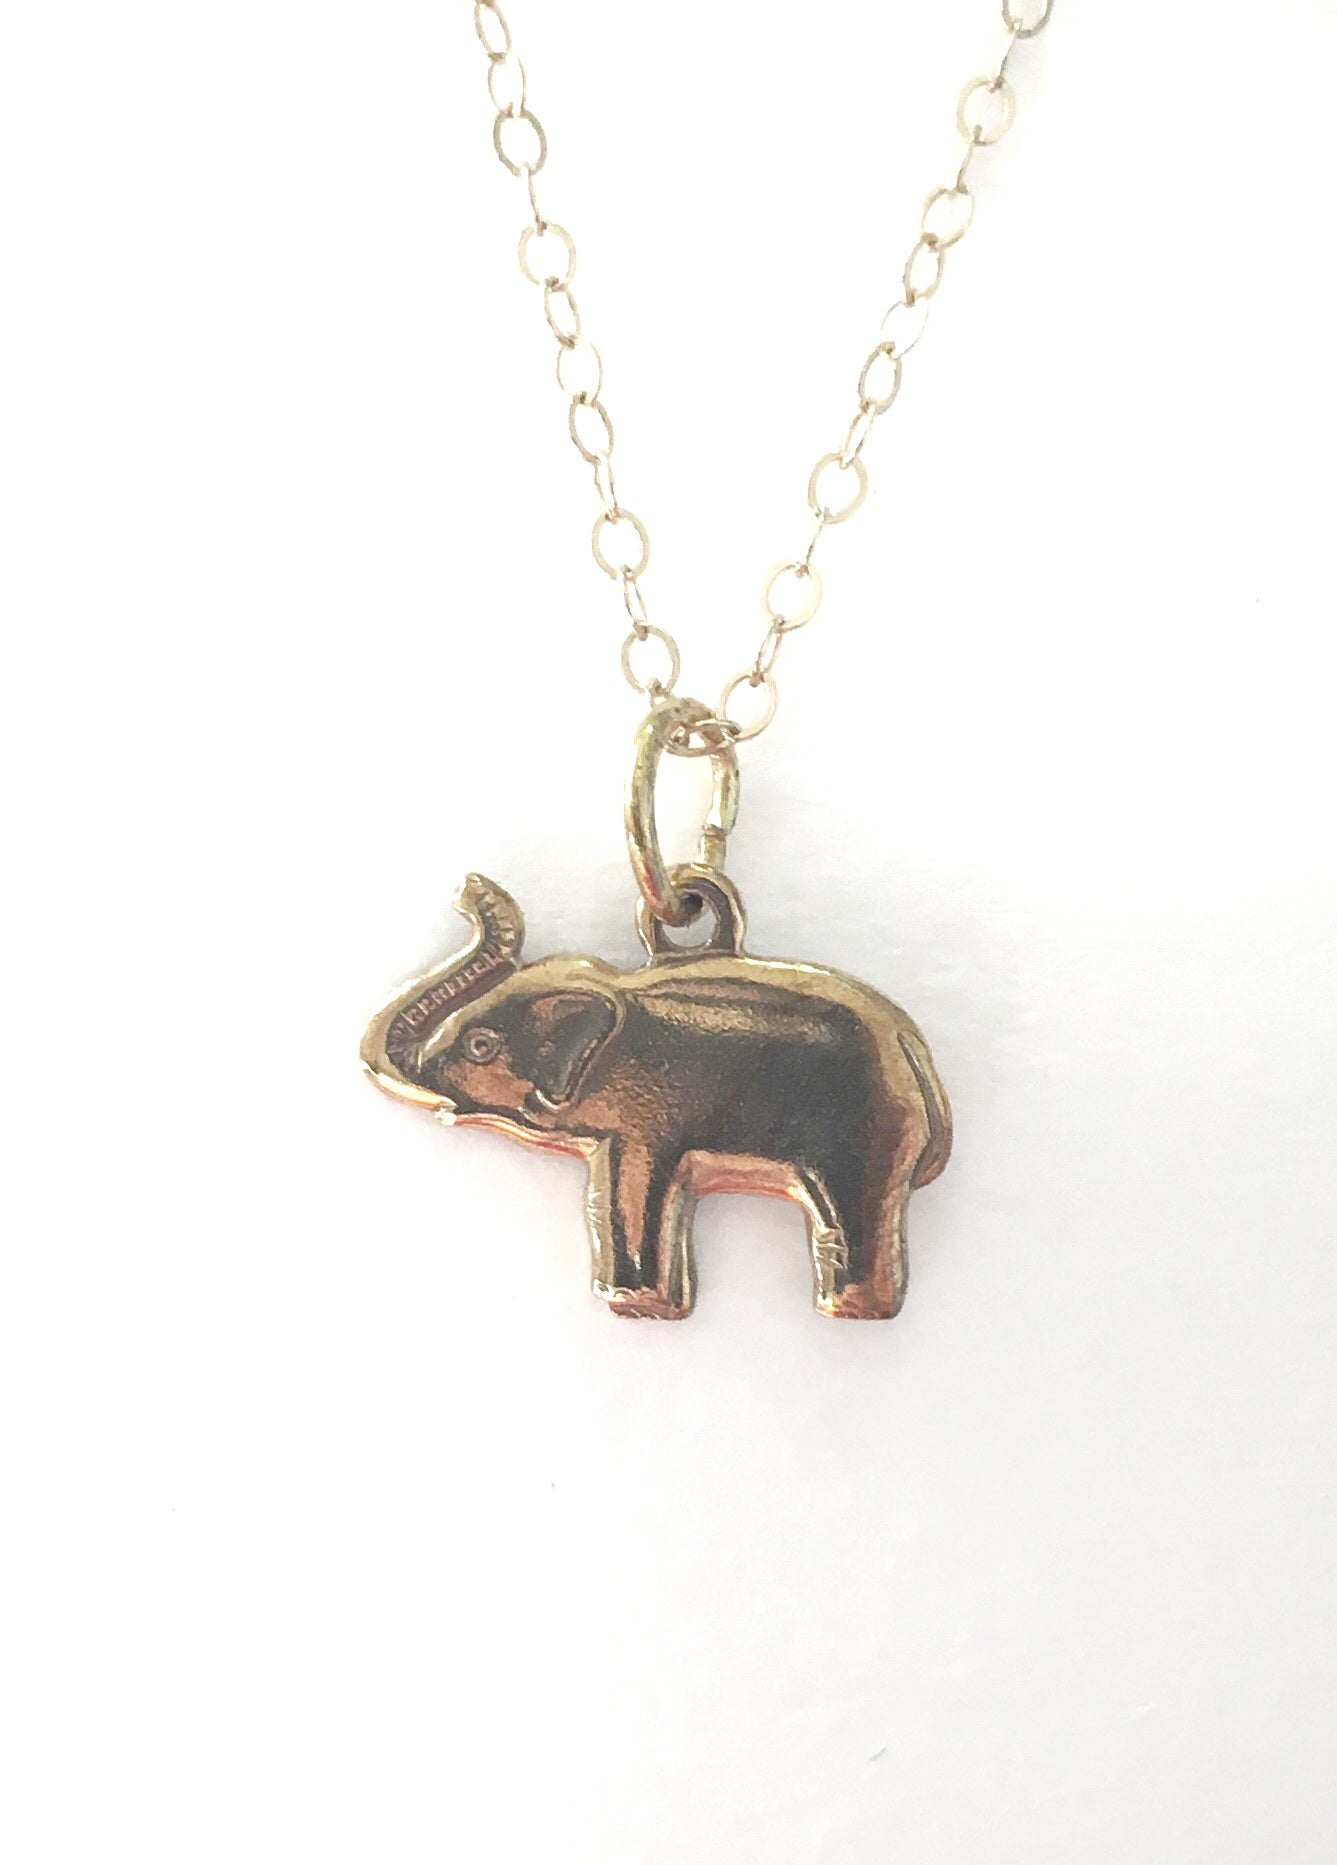 Animal Lovers Charm Necklace - Luni